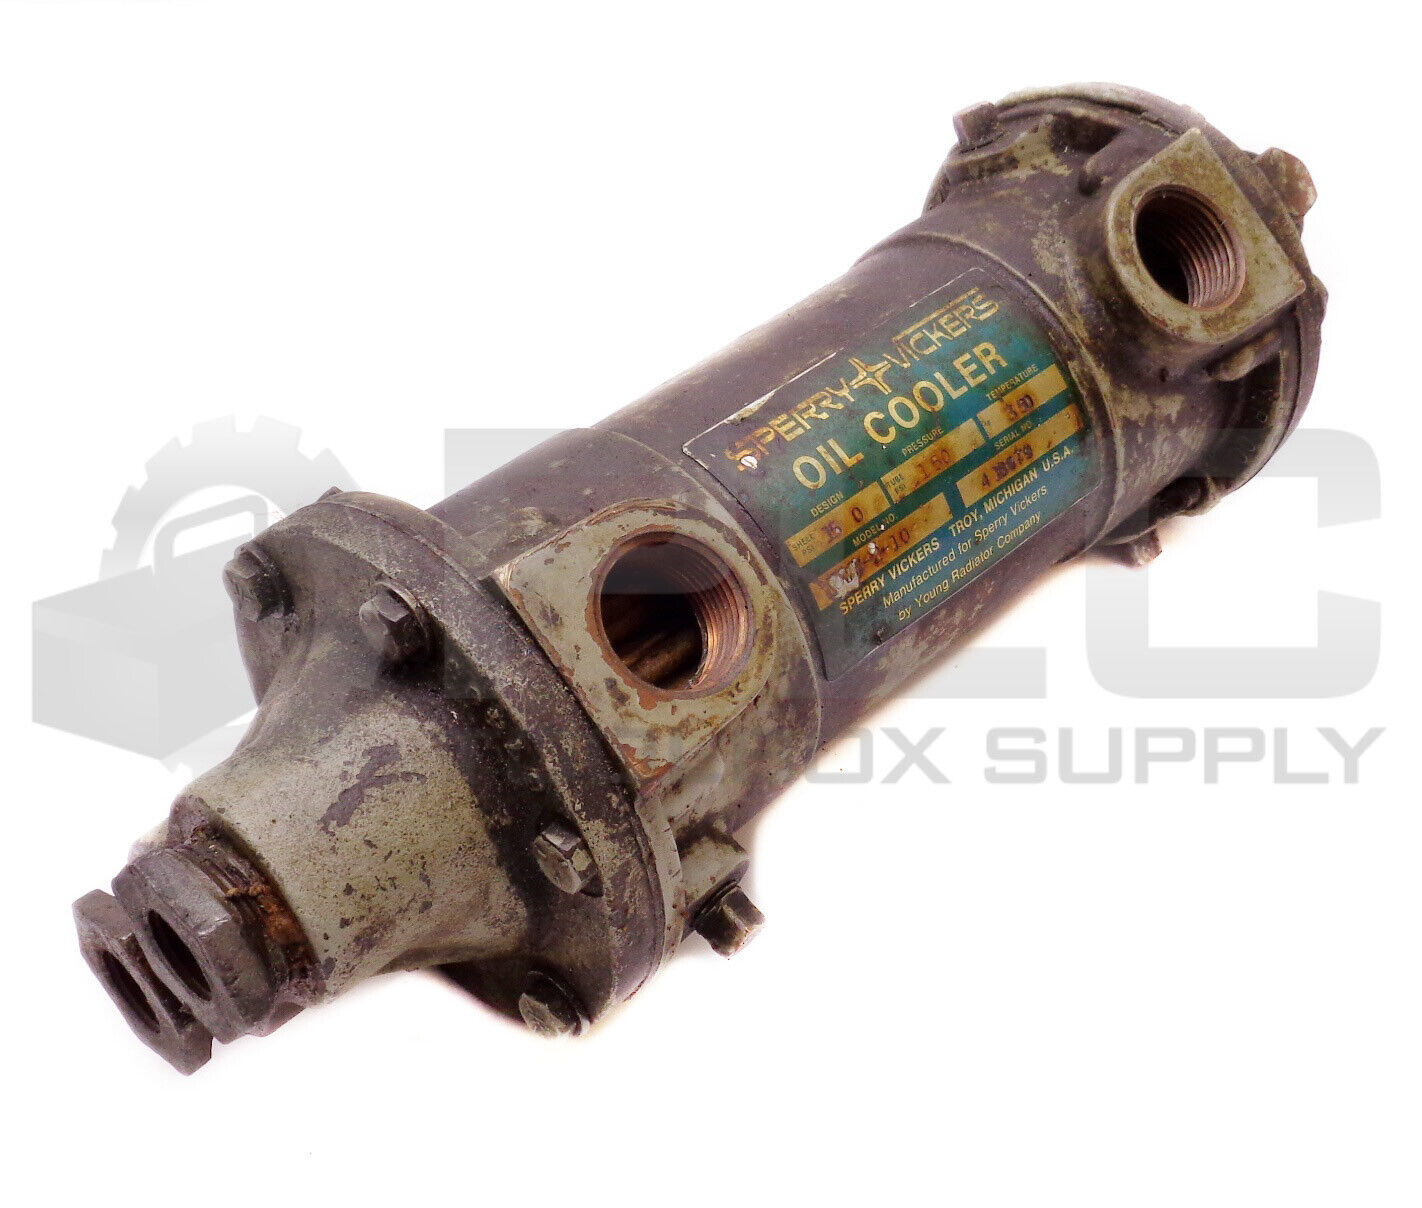 VICKERS 0WW-2-10 OIL COOLER 150PSI 350°